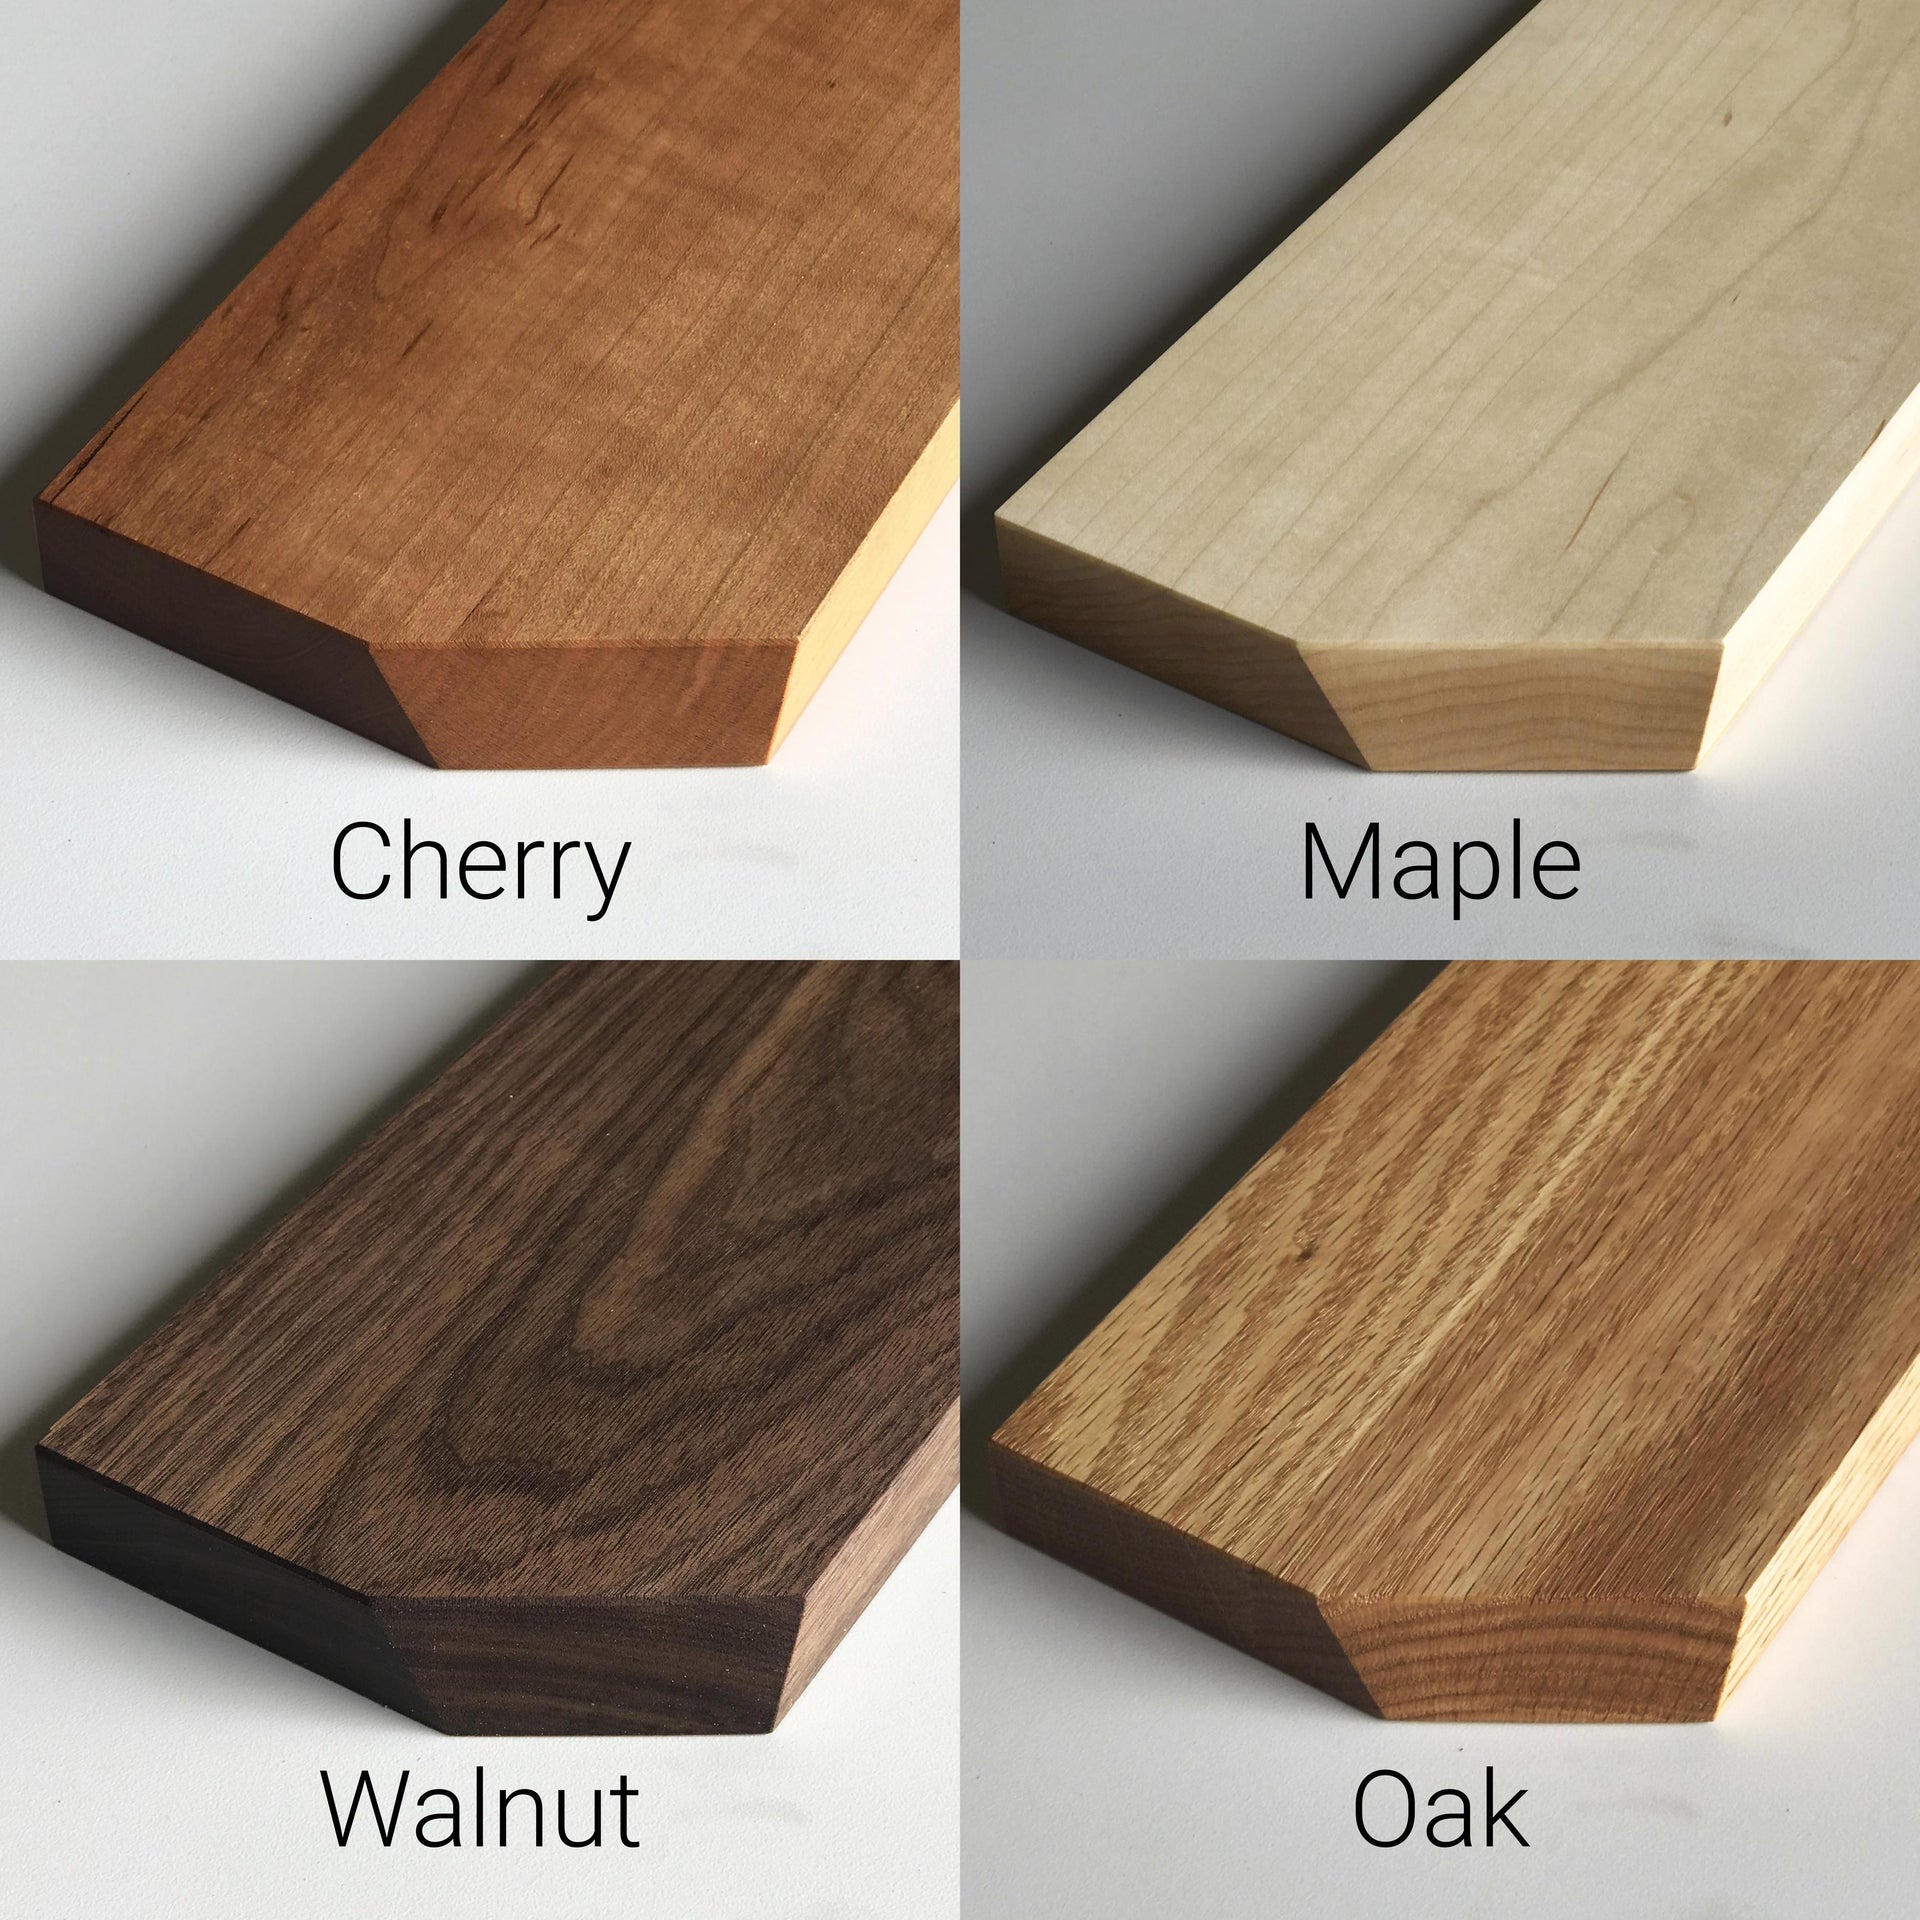 Wood samples of natural cherry, maple, walnut, and oak for organic furniture